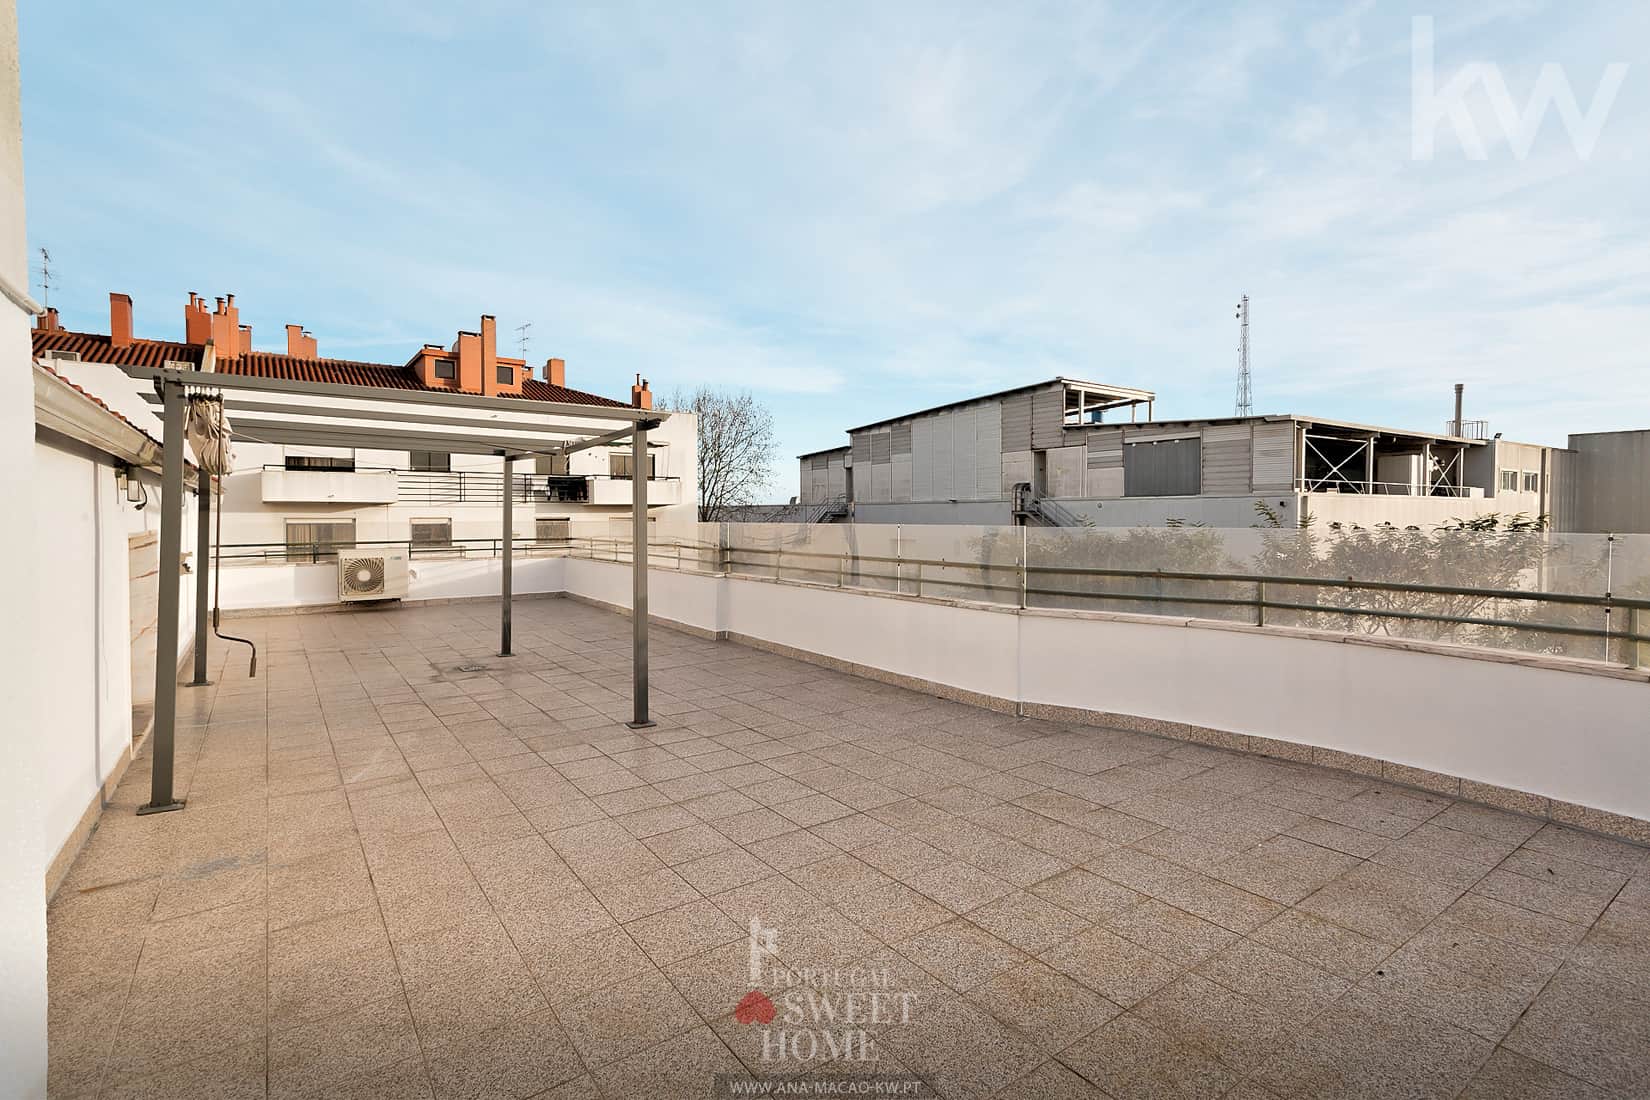 Large terrace (76 m2) on the upper floor